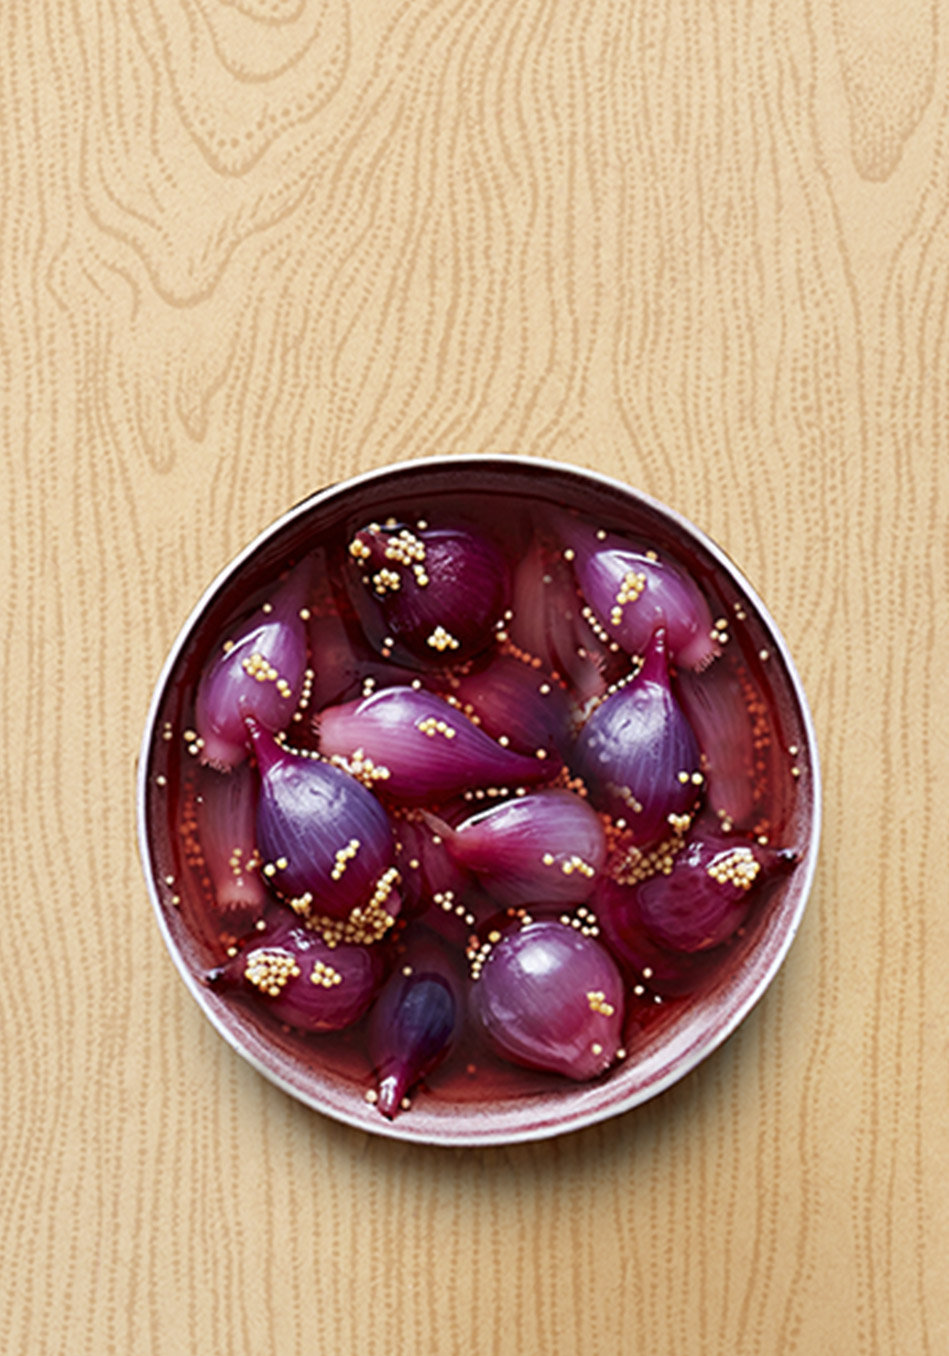 pickled onions recipe